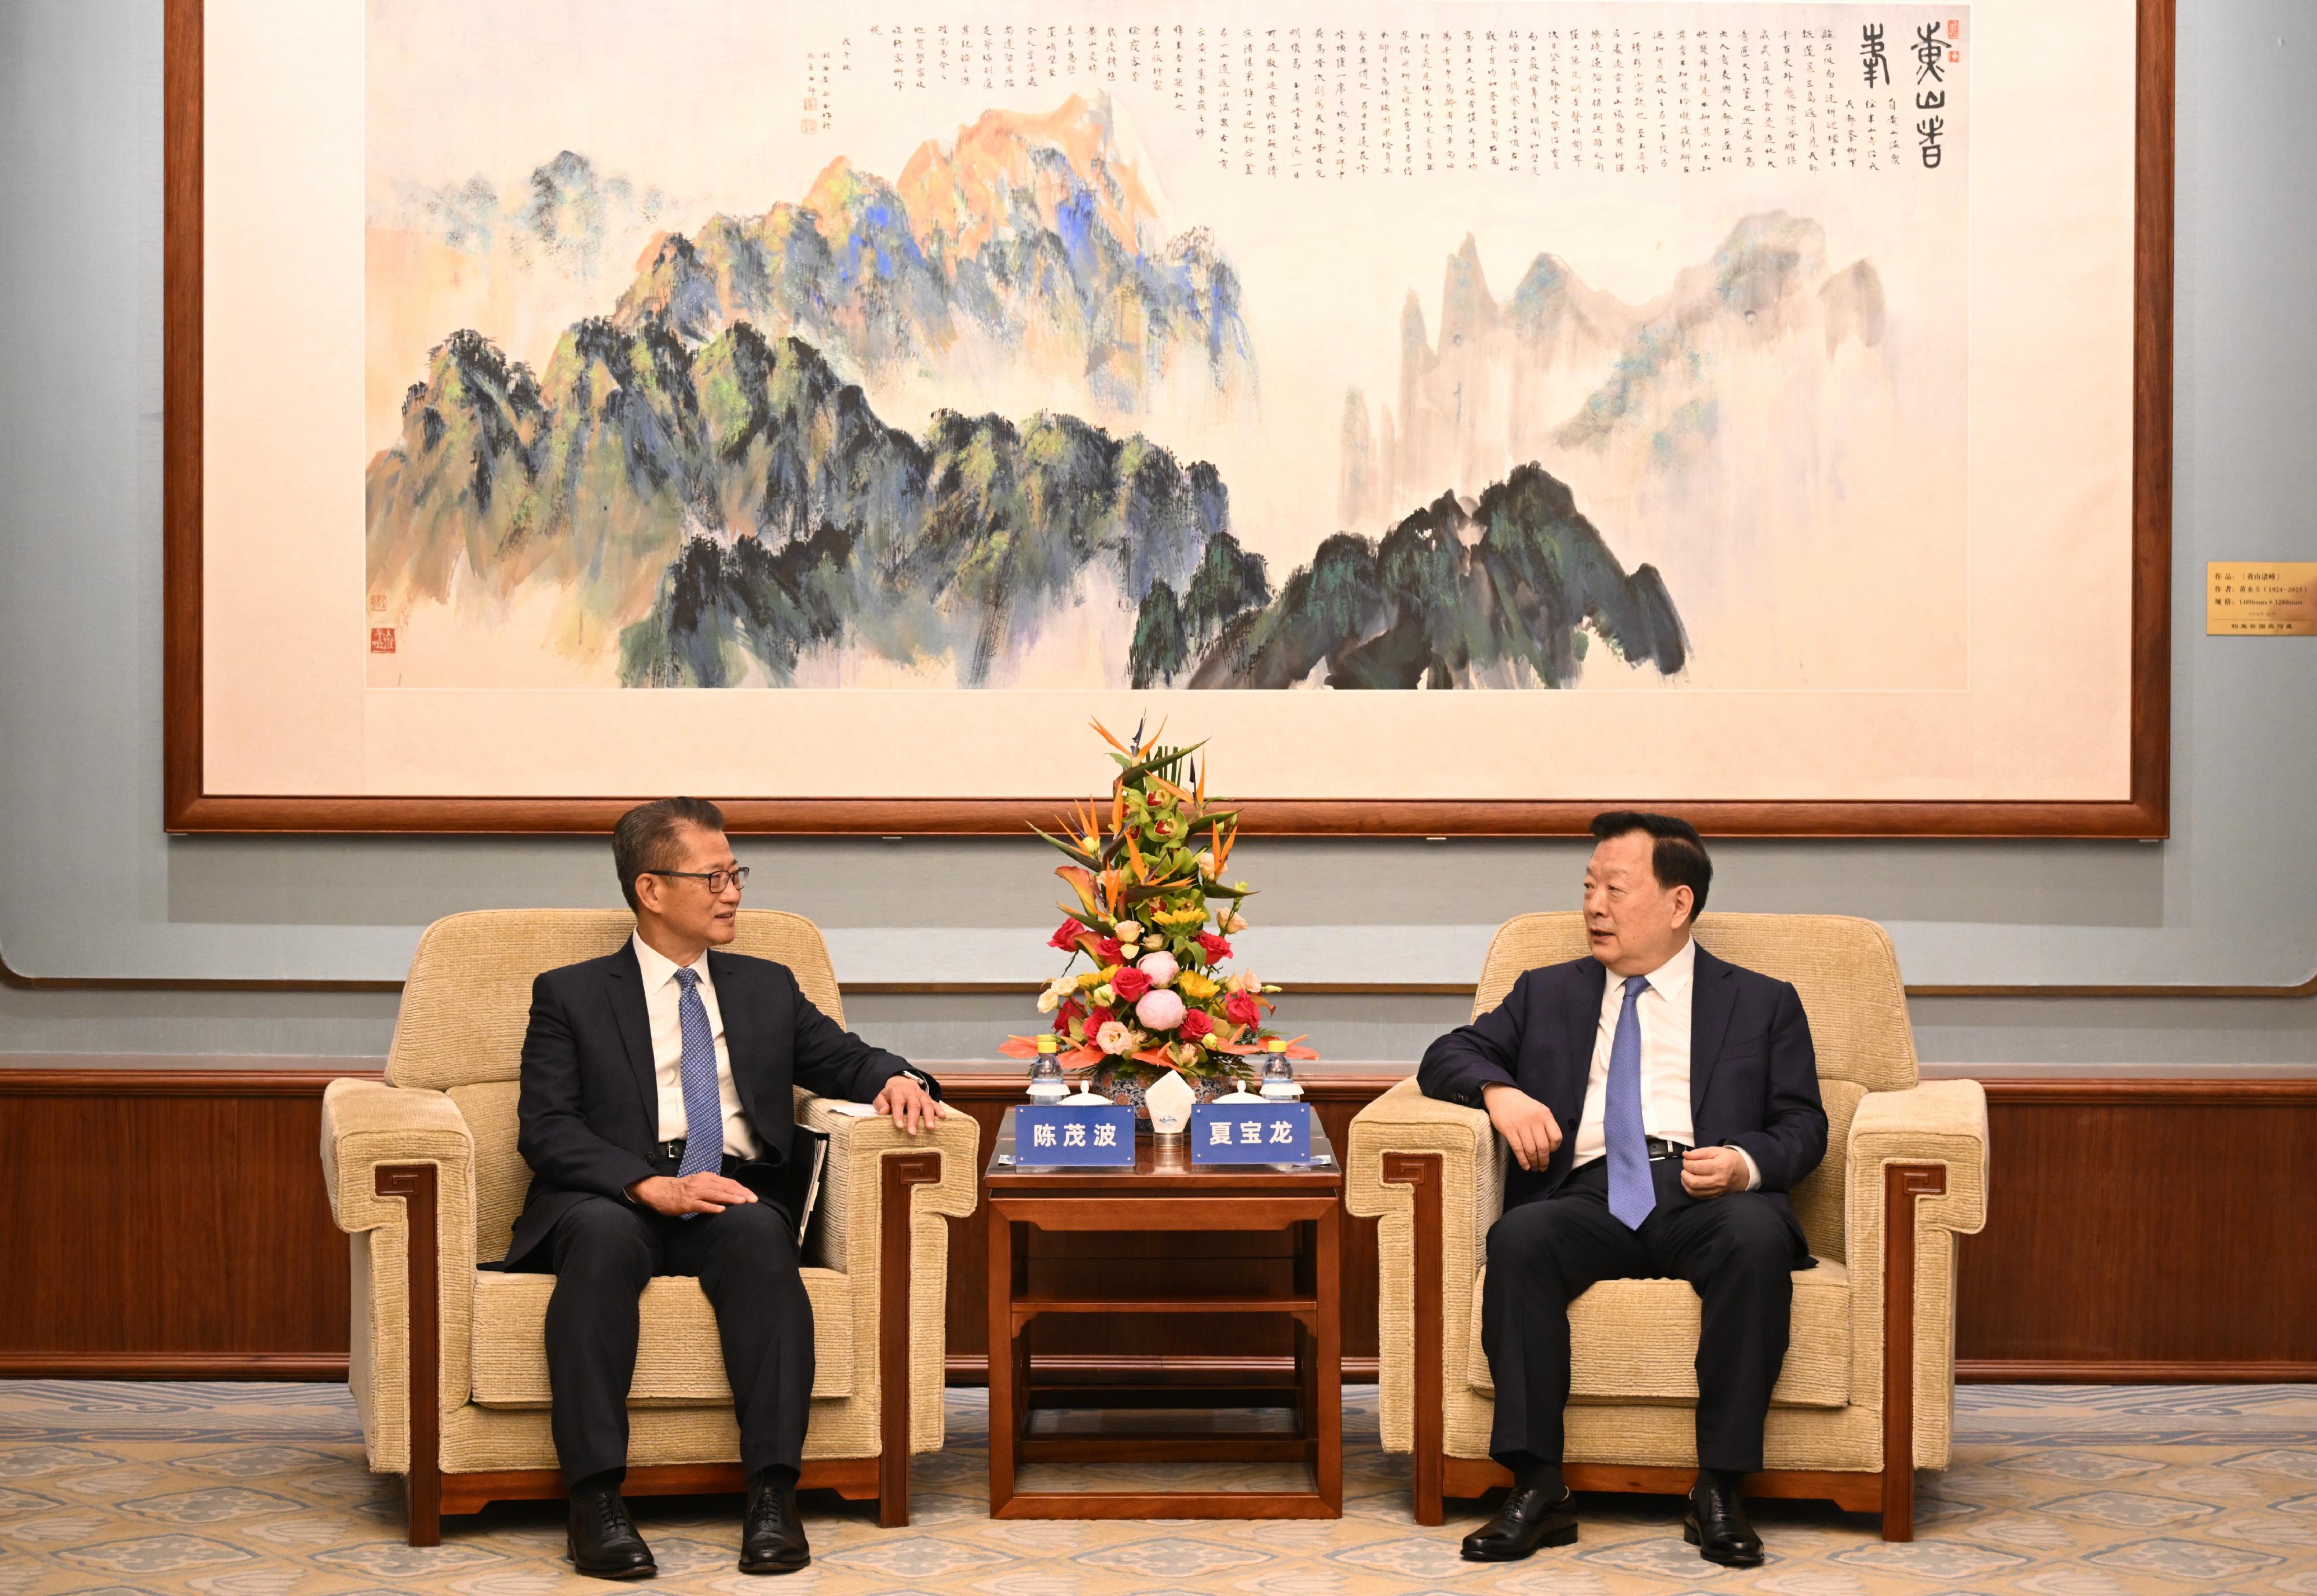 The Financial Secretary, Mr Paul Chan, continued his visit in Beijing today (July 12). Photo shows the Director of the Hong Kong and Macao Affairs Office of the State Council, Mr Xia Baolong (right), meeting Mr Chan.